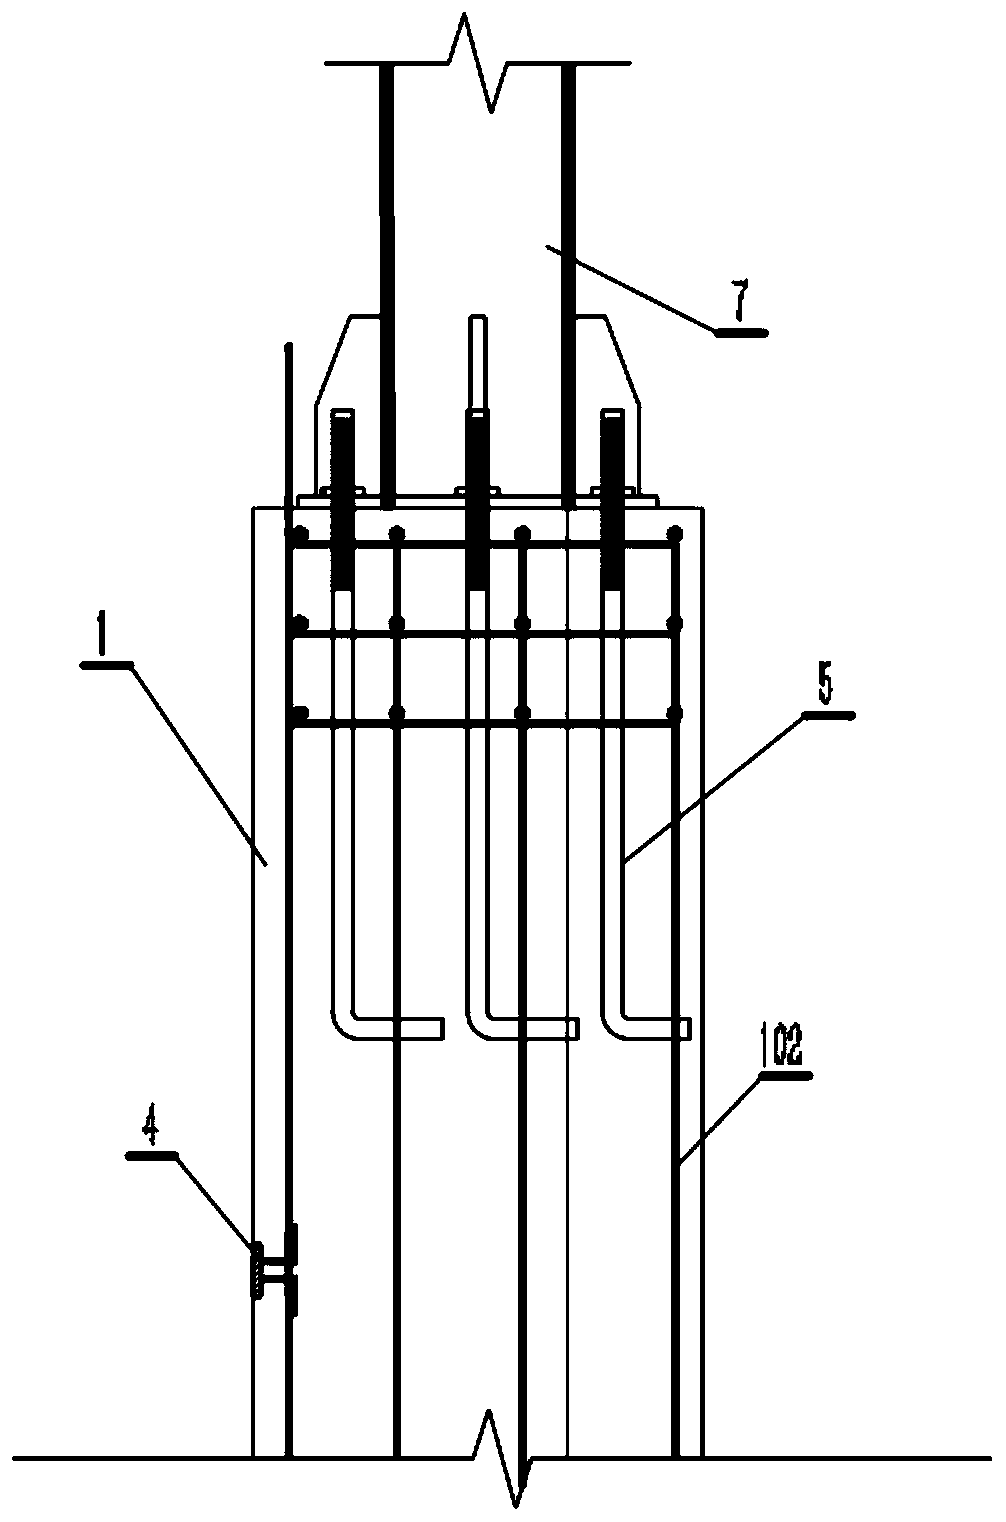 Prefabricated foundation pit for additionally installing elevator and construction method